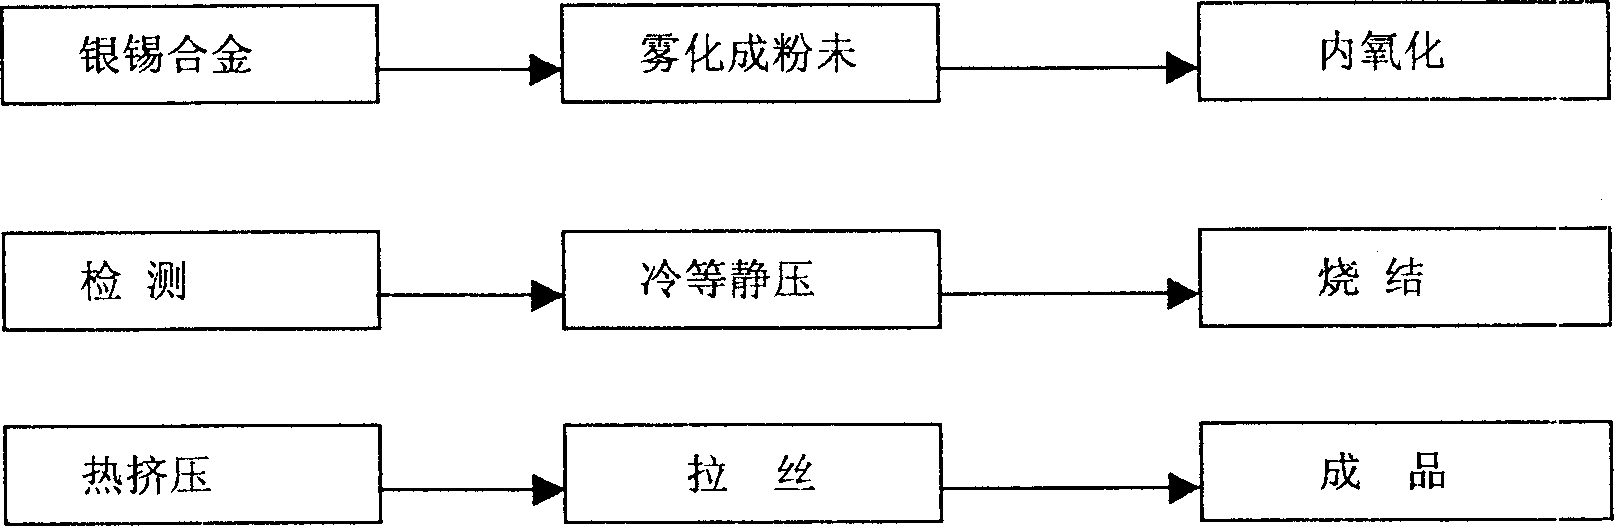 Process for preparing silver tin oxide material